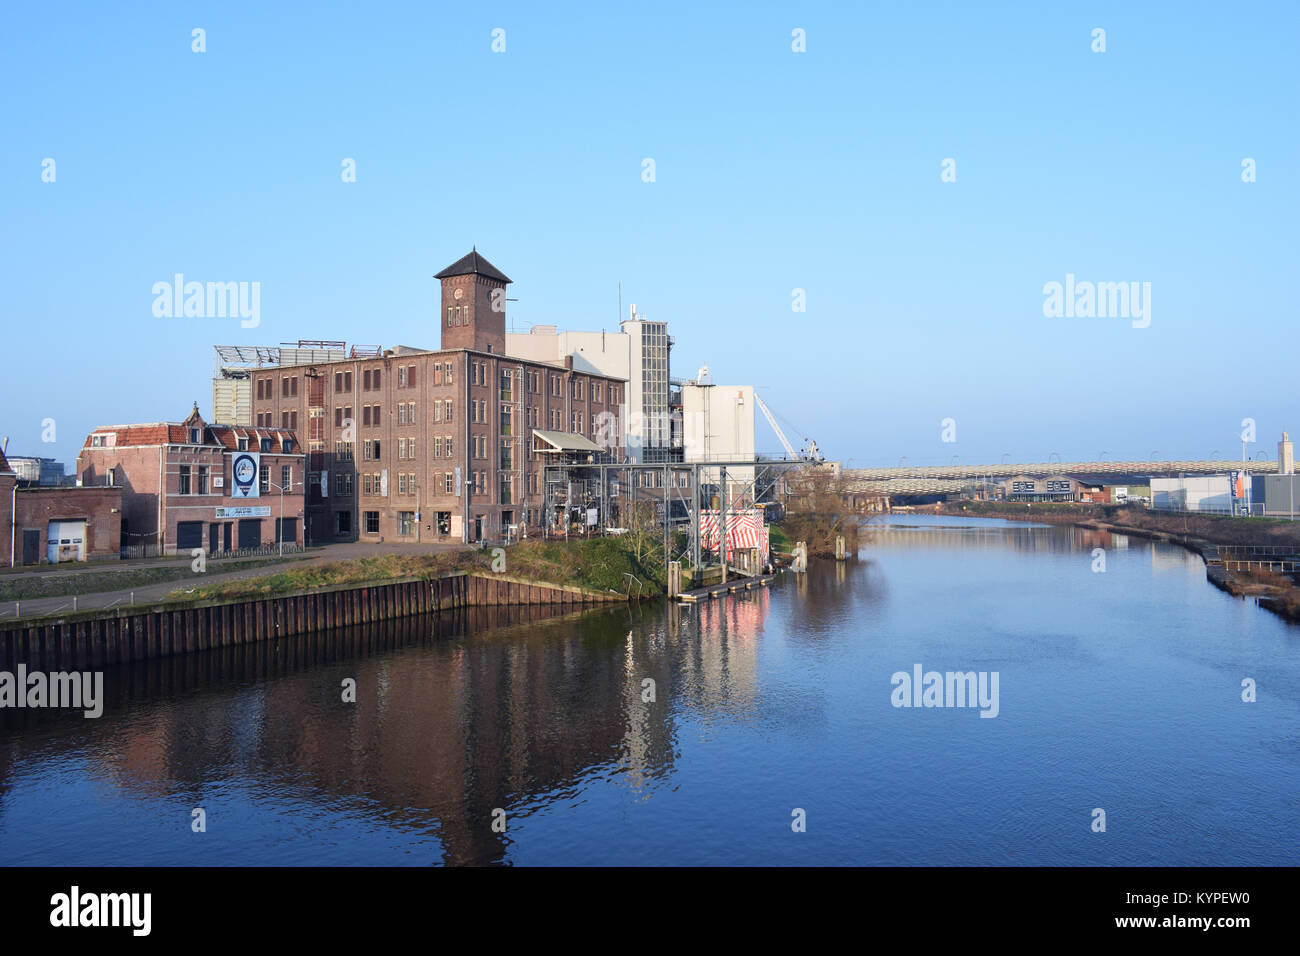 Industry area next to river, 's-Hertogenbosch, the Netherlands Stock Photo